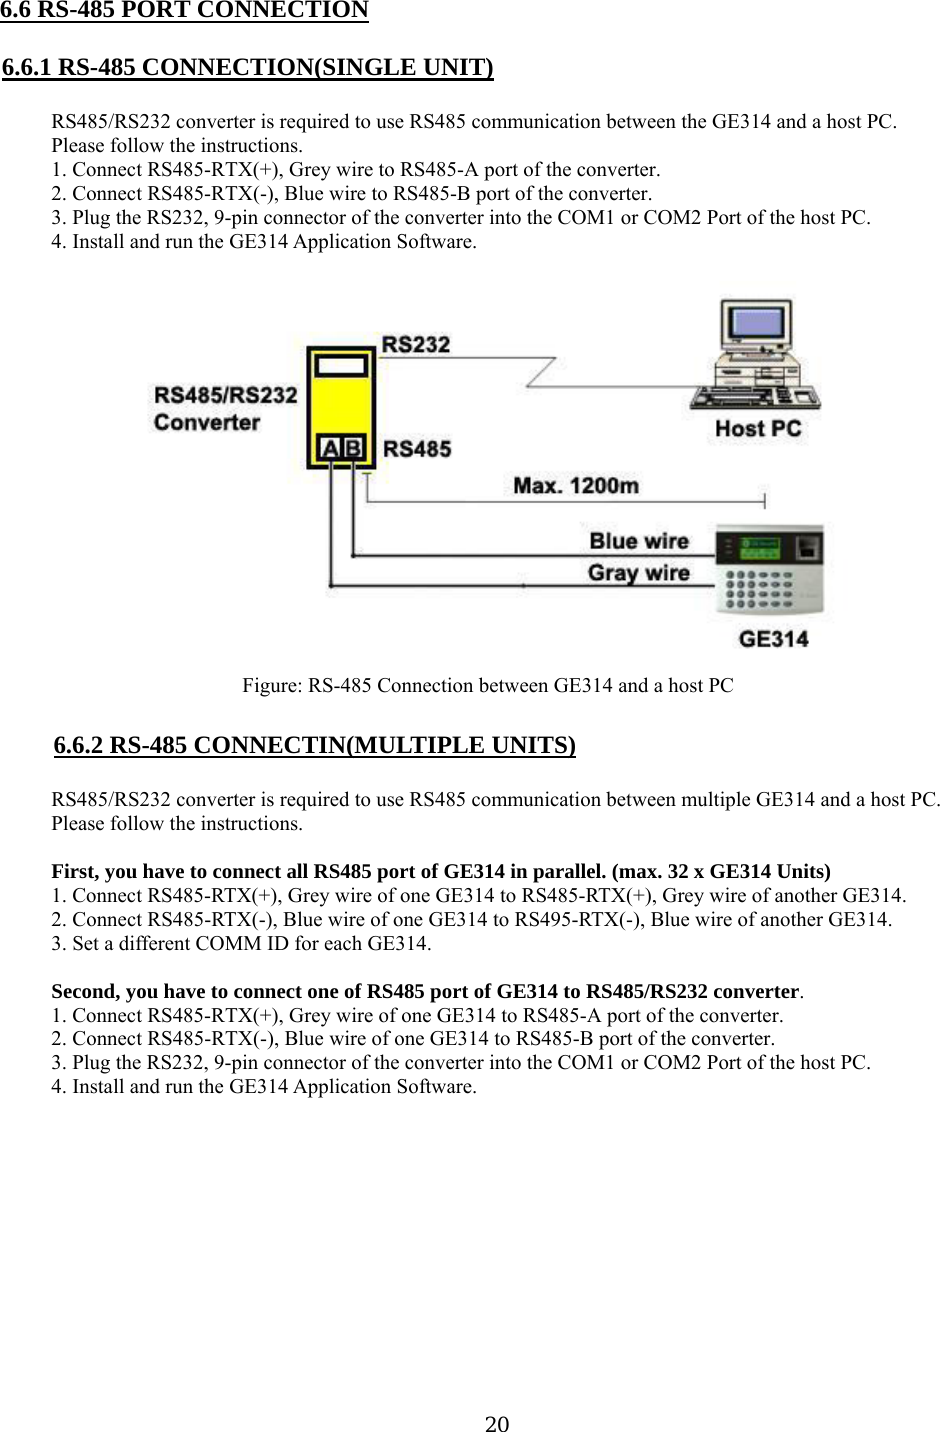 6.6 RS-485 PORT CONNECTION  6.6.1 RS-485 CONNECTION(SINGLE UNIT)  RS485/RS232 converter is required to use RS485 communication between the GE314 and a host PC. Please follow the instructions. 1. Connect RS485-RTX(+), Grey wire to RS485-A port of the converter. 2. Connect RS485-RTX(-), Blue wire to RS485-B port of the converter. 3. Plug the RS232, 9-pin connector of the converter into the COM1 or COM2 Port of the host PC. 4. Install and run the GE314 Application Software.  Figure: RS-485 Connection between GE314 and a host PC  6.6.2 RS-485 CONNECTIN(MULTIPLE UNITS)  RS485/RS232 converter is required to use RS485 communication between multiple GE314 and a host PC. Please follow the instructions.  First, you have to connect all RS485 port of GE314 in parallel. (max. 32 x GE314 Units) 1. Connect RS485-RTX(+), Grey wire of one GE314 to RS485-RTX(+), Grey wire of another GE314. 2. Connect RS485-RTX(-), Blue wire of one GE314 to RS495-RTX(-), Blue wire of another GE314. 3. Set a different COMM ID for each GE314.  Second, you have to connect one of RS485 port of GE314 to RS485/RS232 converter. 1. Connect RS485-RTX(+), Grey wire of one GE314 to RS485-A port of the converter. 2. Connect RS485-RTX(-), Blue wire of one GE314 to RS485-B port of the converter. 3. Plug the RS232, 9-pin connector of the converter into the COM1 or COM2 Port of the host PC. 4. Install and run the GE314 Application Software.  20